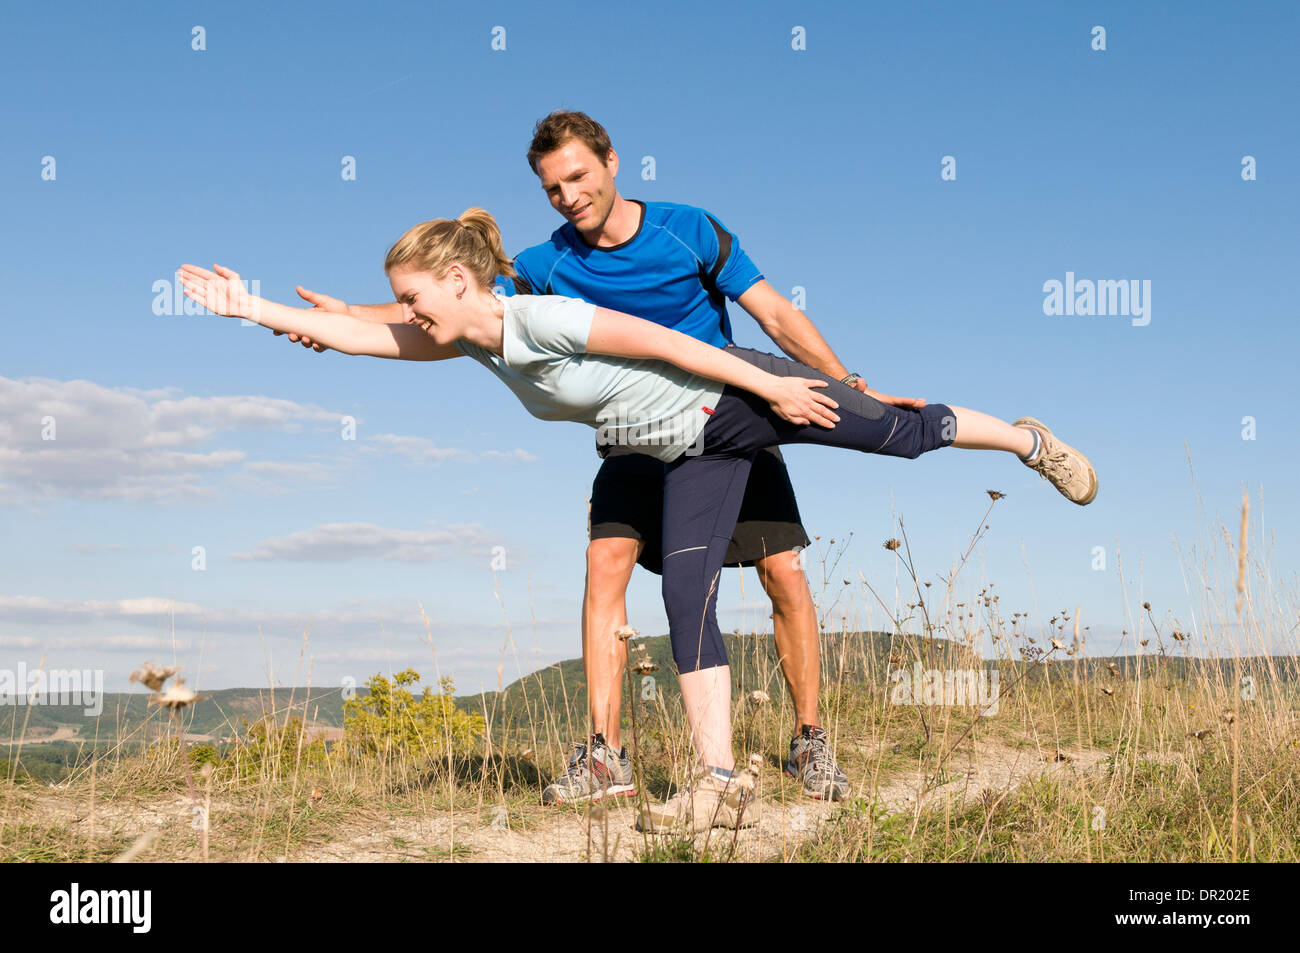 Woman working with personal trainer outdoors Stock Photo